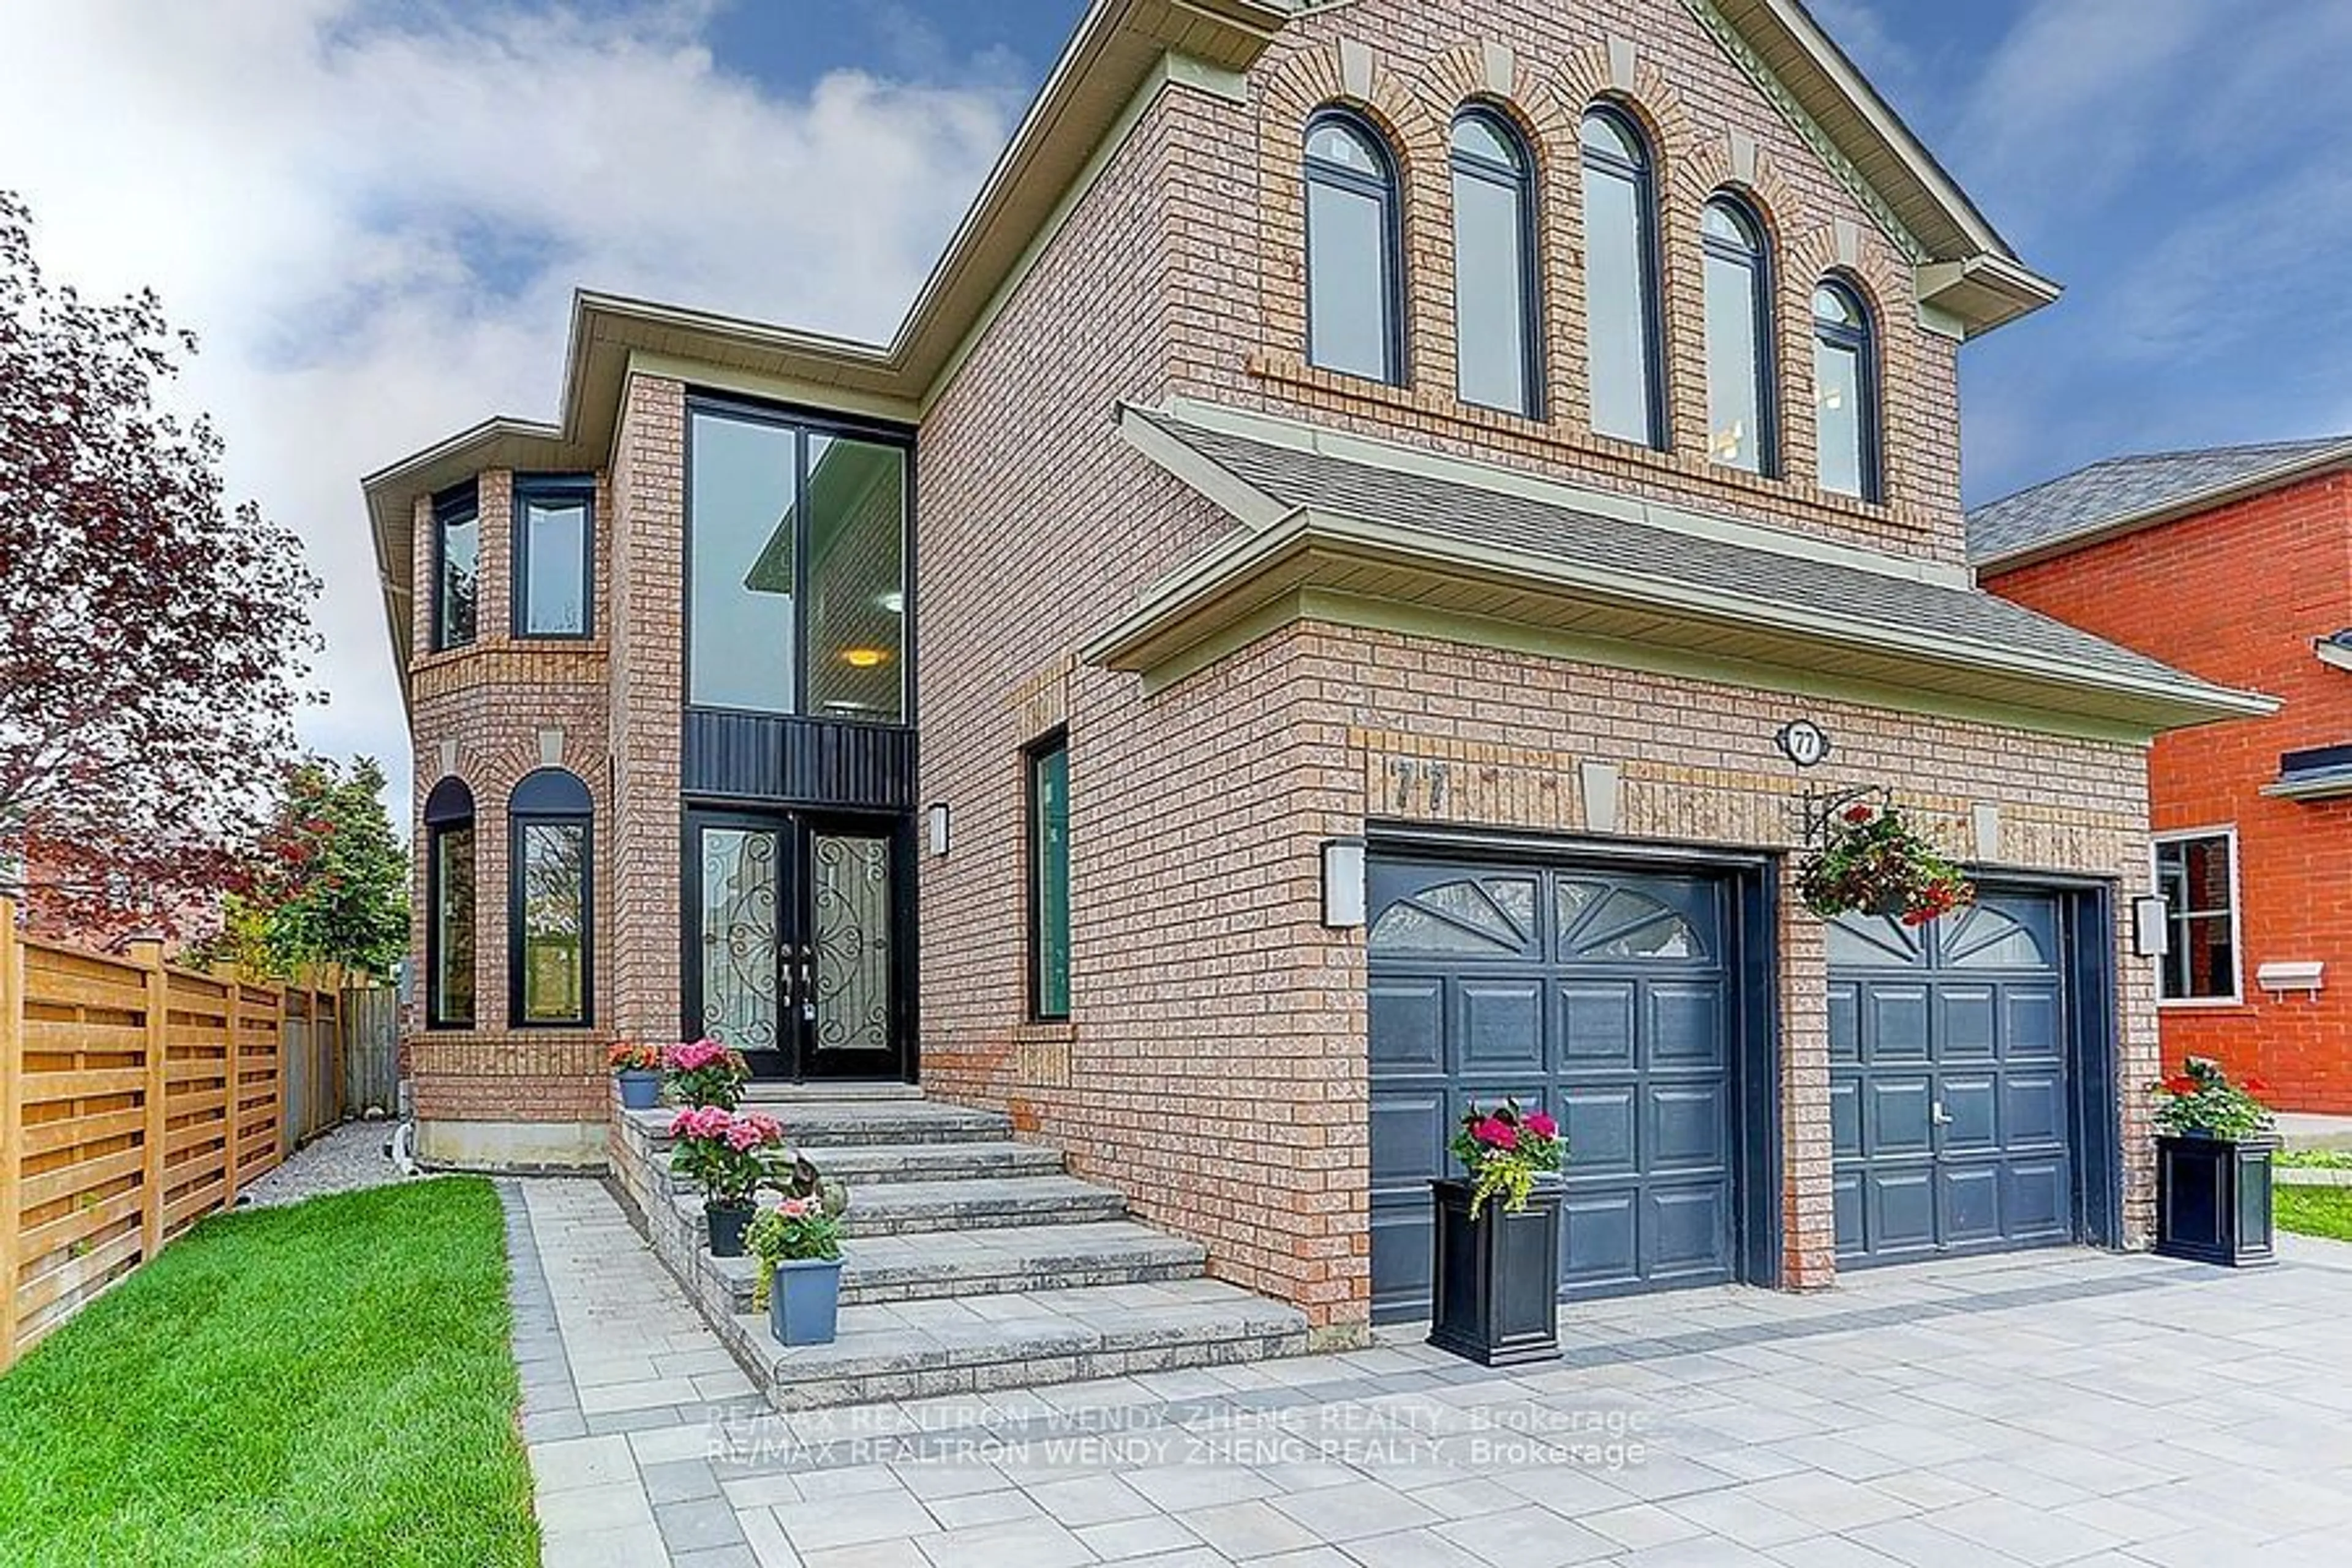 Home with brick exterior material for 77 Redstone Rd, Richmond Hill Ontario L4S 1T7